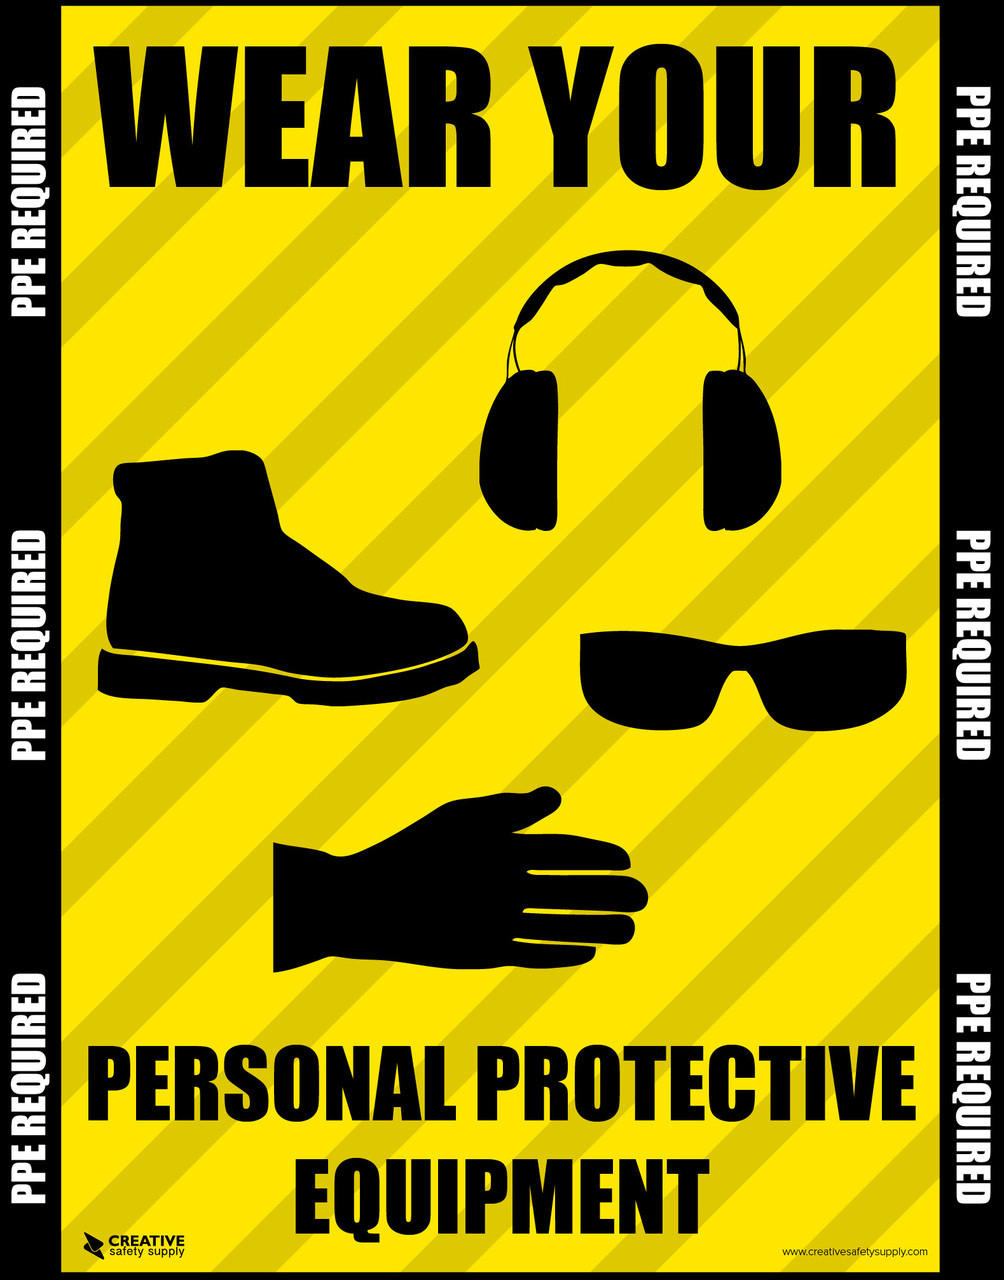 Wear Your Personal Protective Equipment - Safety poster wire harness inspection tools 